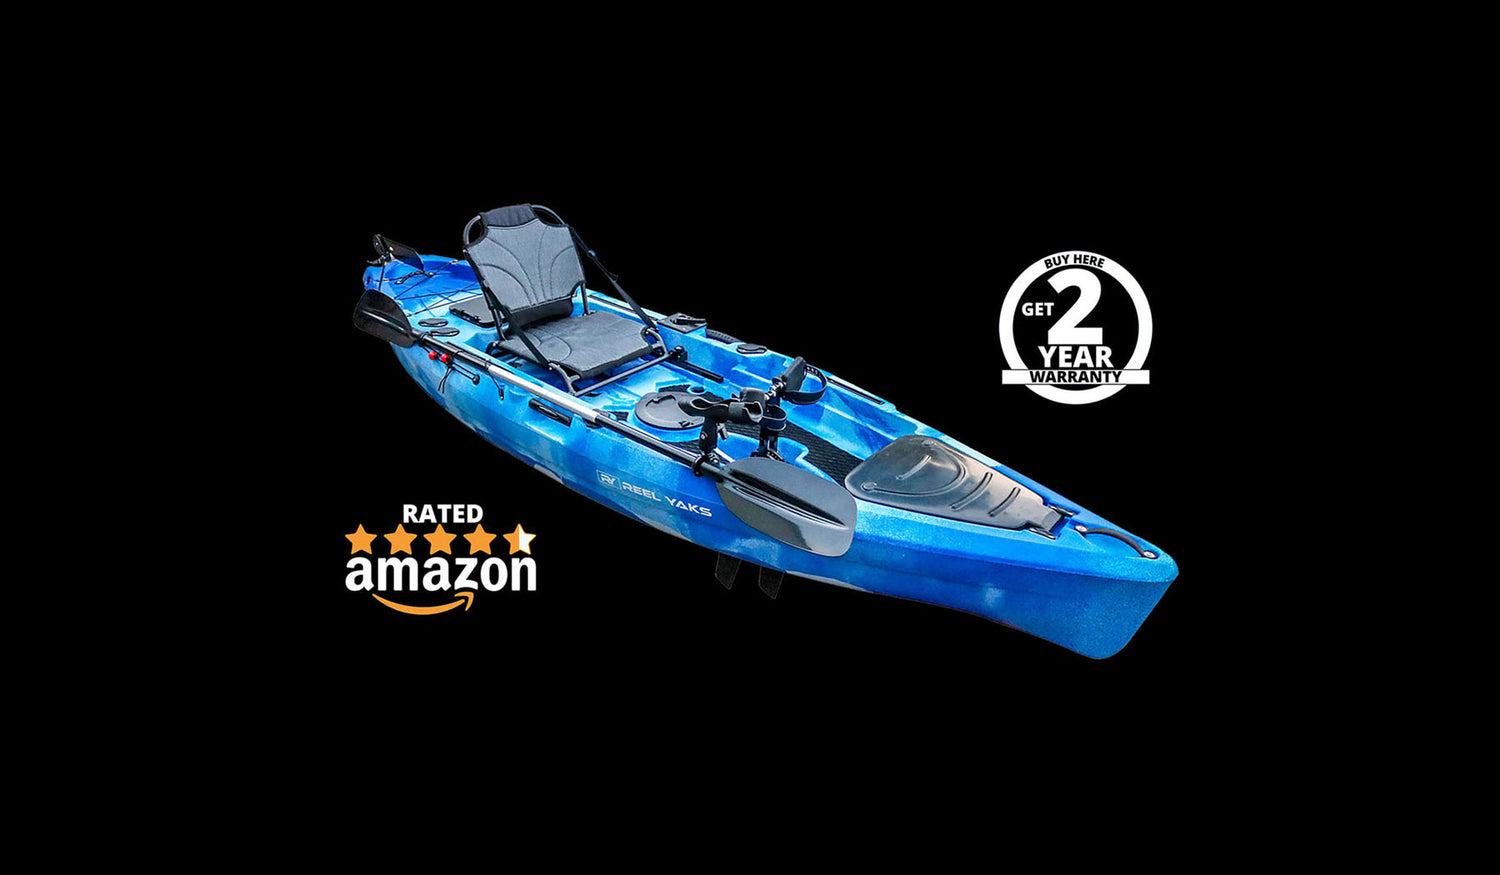  Expedition Canoe for Family or Fishing 15.8ft, 2 to 4 Person, Comfortable Seats with 2 Paddles, Lightweight Stable & Easy to Maneuver